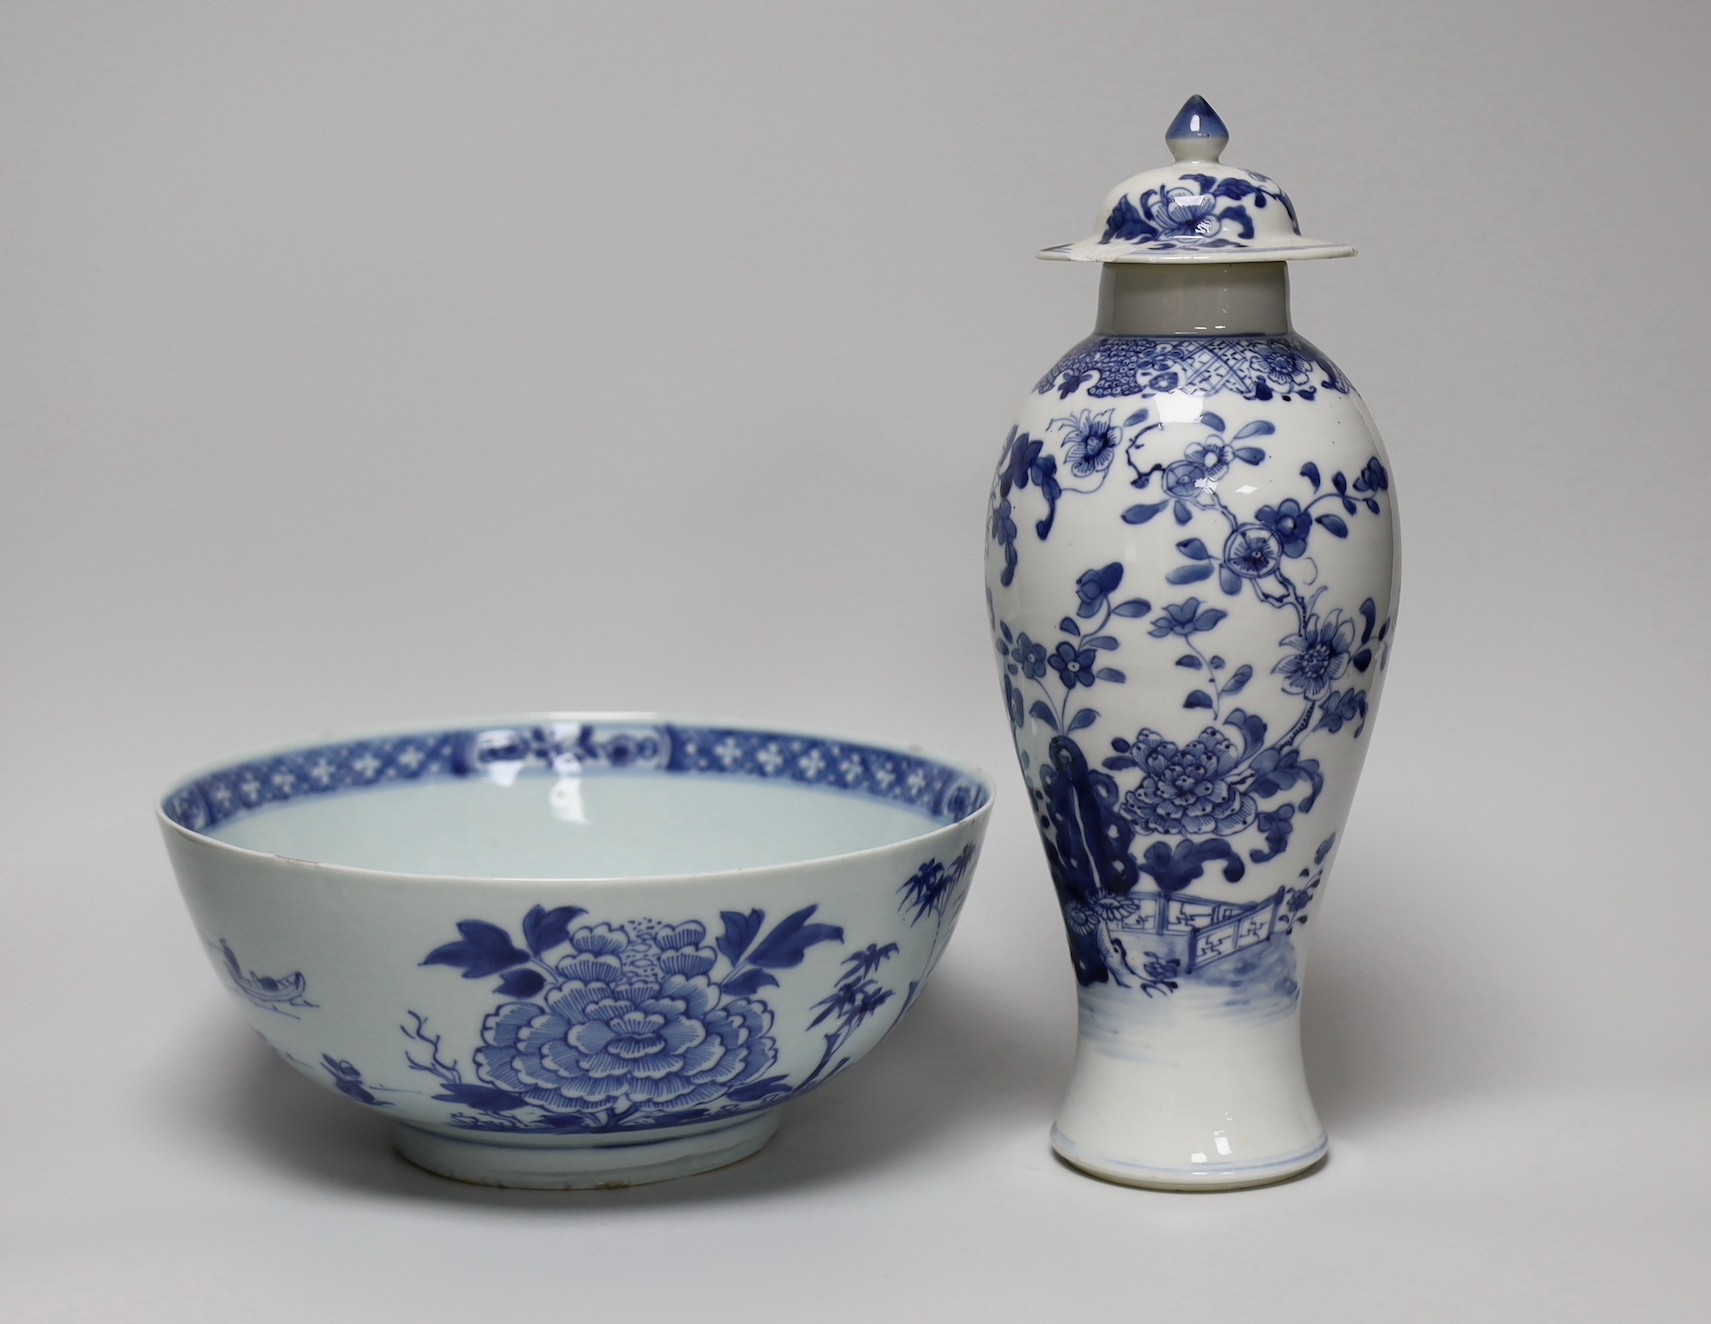 A Chinese blue and white bowl and a similar vase, both Qianlong period, vase 28cm tall